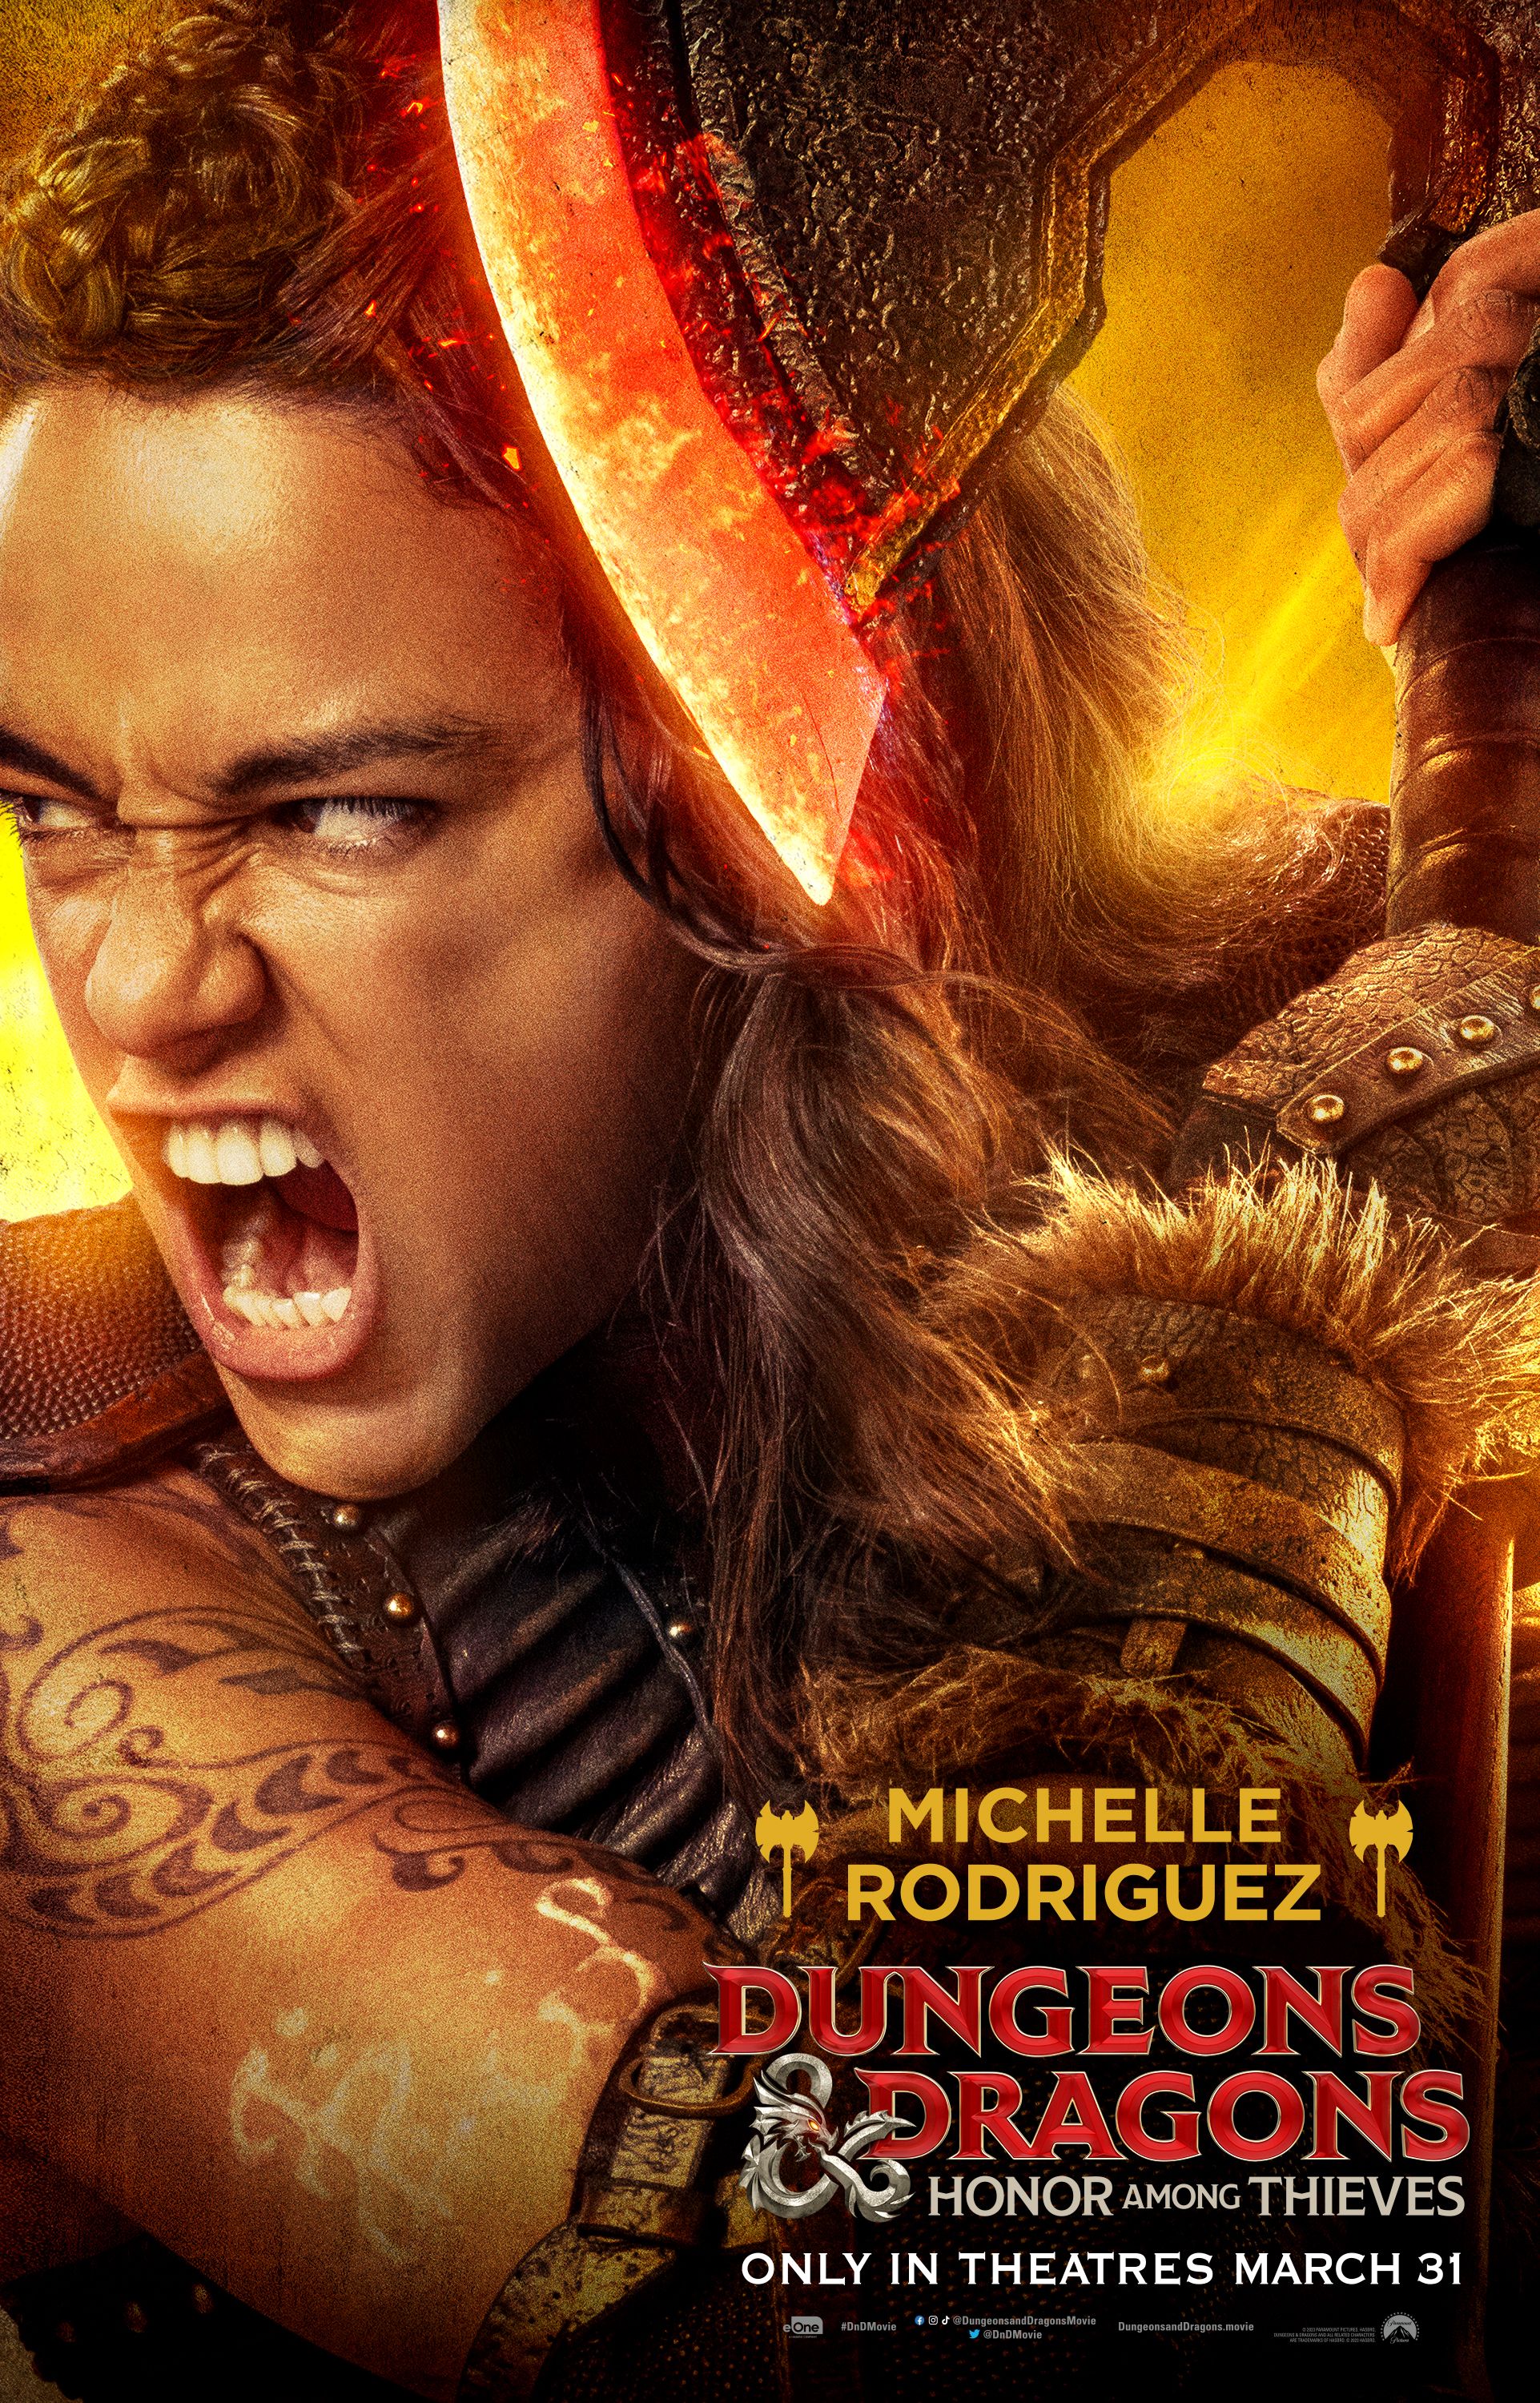 donjons-et-dragons-honor-among-thieves-michelle-rodriguez